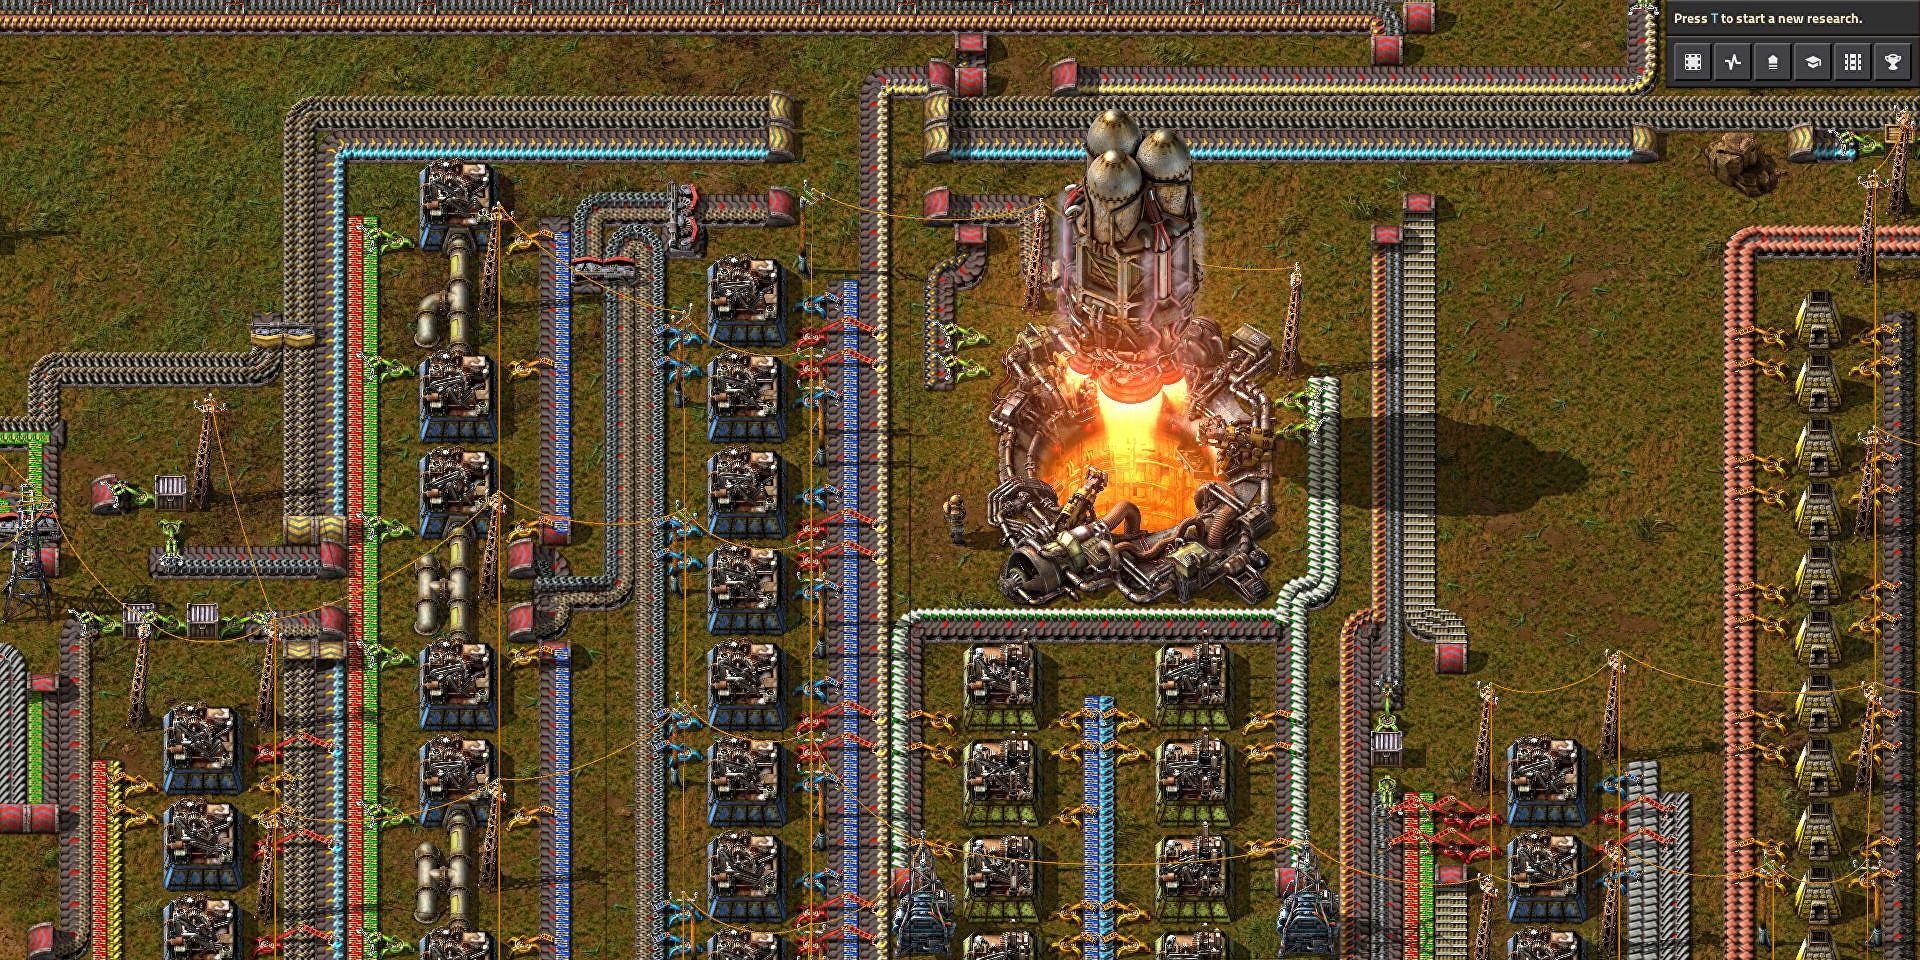 A rocket blasting off, signifying the end of a Factorio game